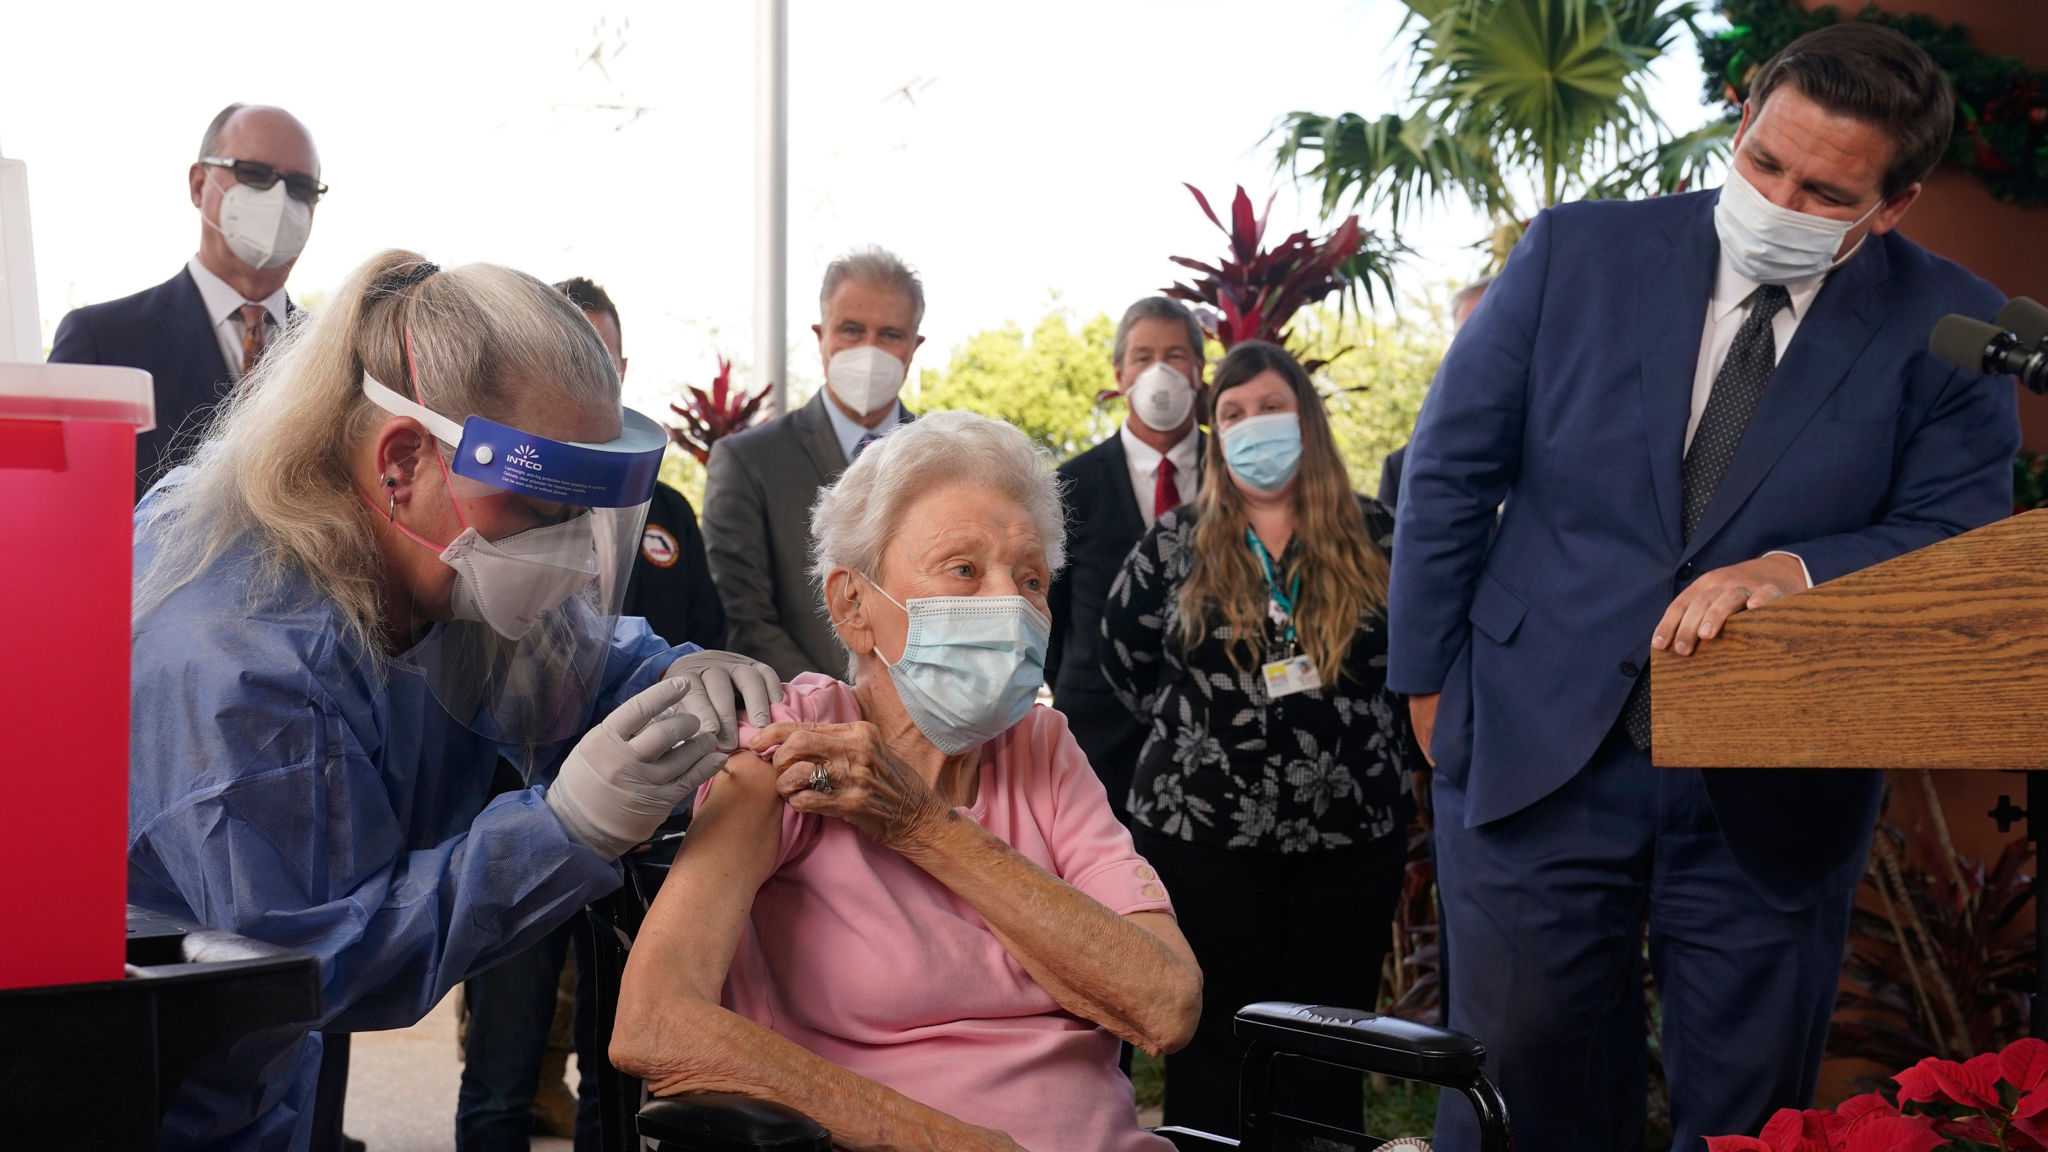 Florida Gov. Ron DeSantis watches as nurse Christine Philips, left, administers the Pfizer-BioNTech vaccine for COVID-19 to Vera Leip, 88, a resident of John Knox Village, Wednesday, Dec. 16, 2020, in Pompano Beach, Fla. Nursing home residents and health care workers in Florida began receiving the vaccine this week. (AP Photo/Marta Lavandier)